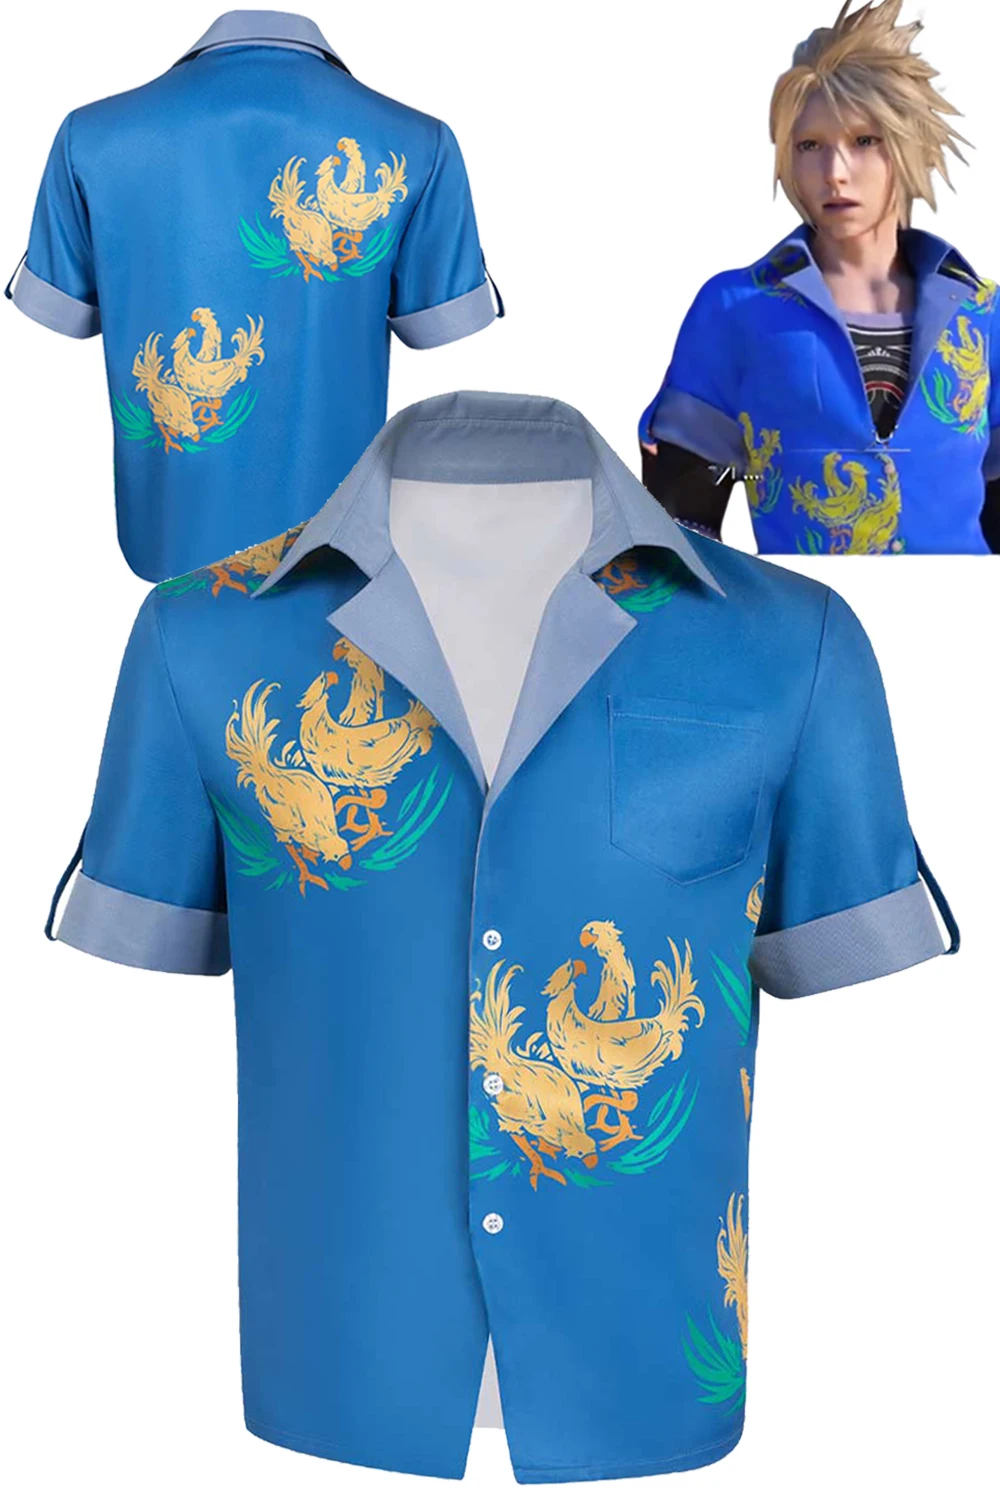 

Cloud Cosplay Blue Shirts Costume Anime Game Final Cosplay Fantasy VII Roleplay Outfits Men Summer Beach Top Male Halloween Suit